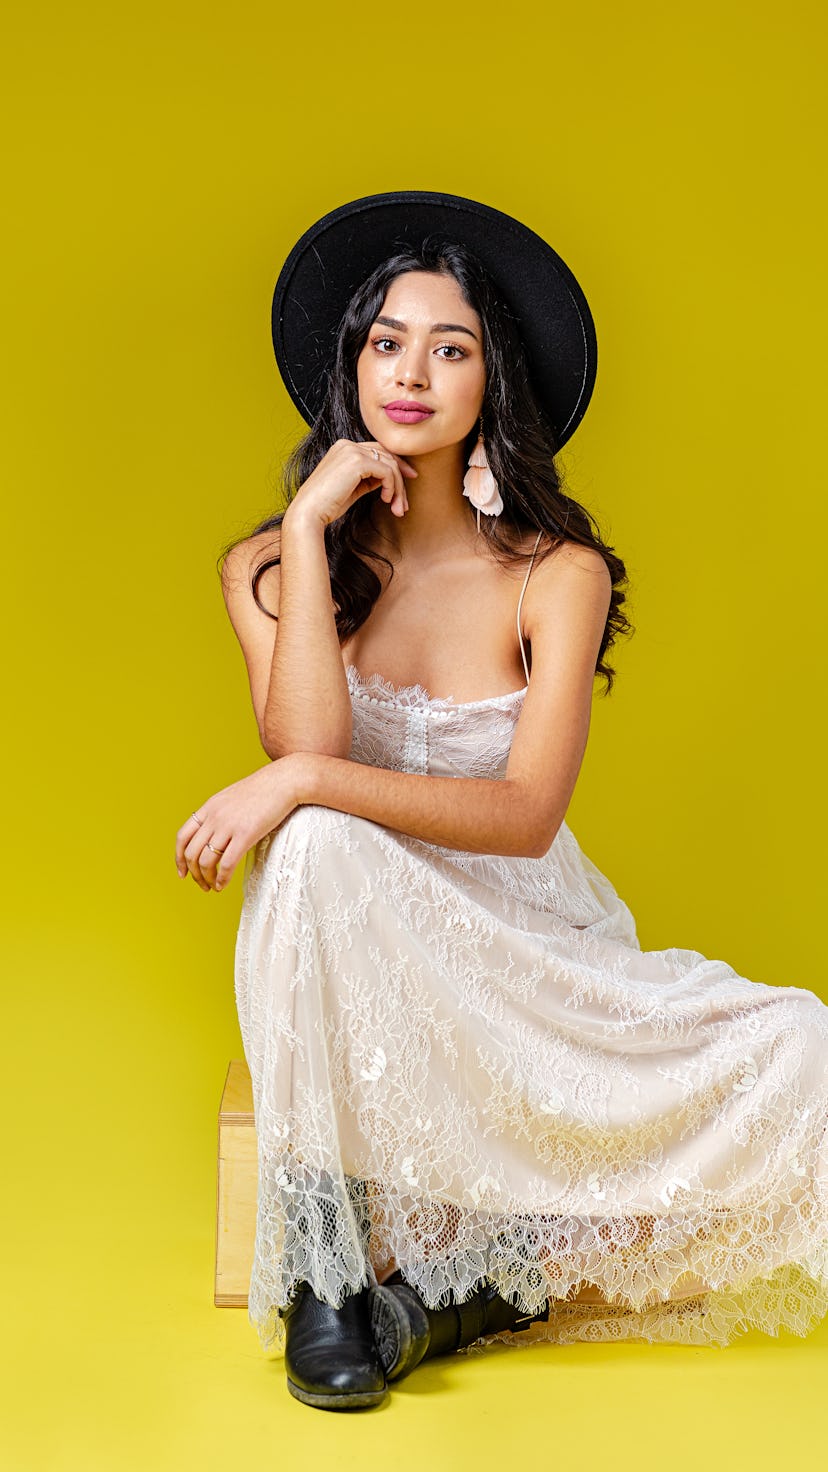 A portrait of attractive young woman wearing bohemian style dress and a black fedora hat, sitting in...